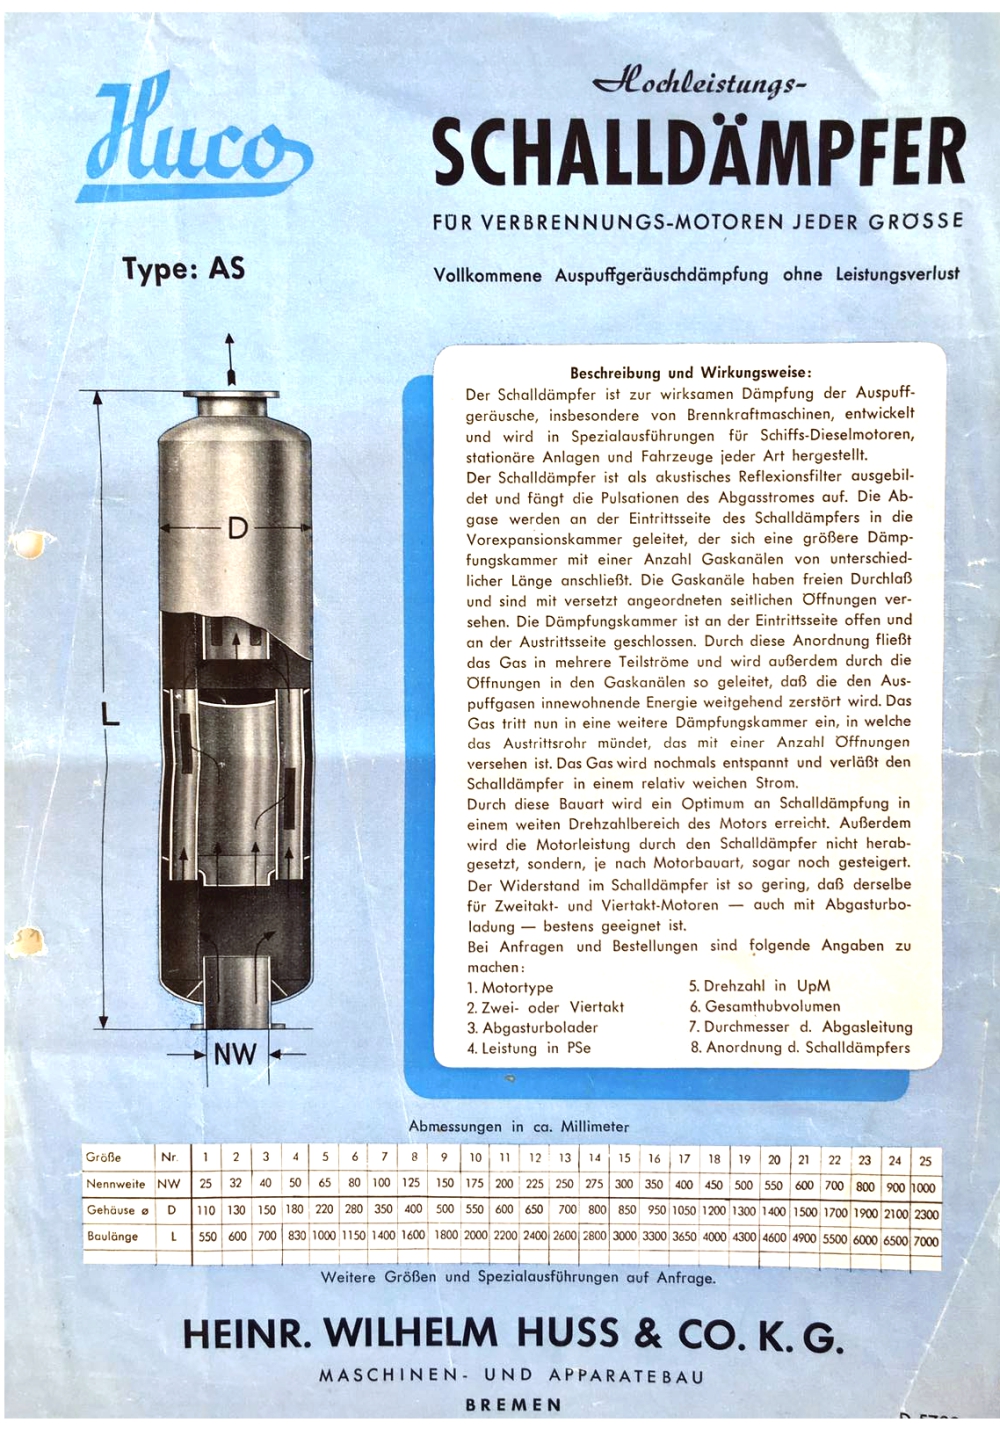 HUSS silencer brochure from the 1930s